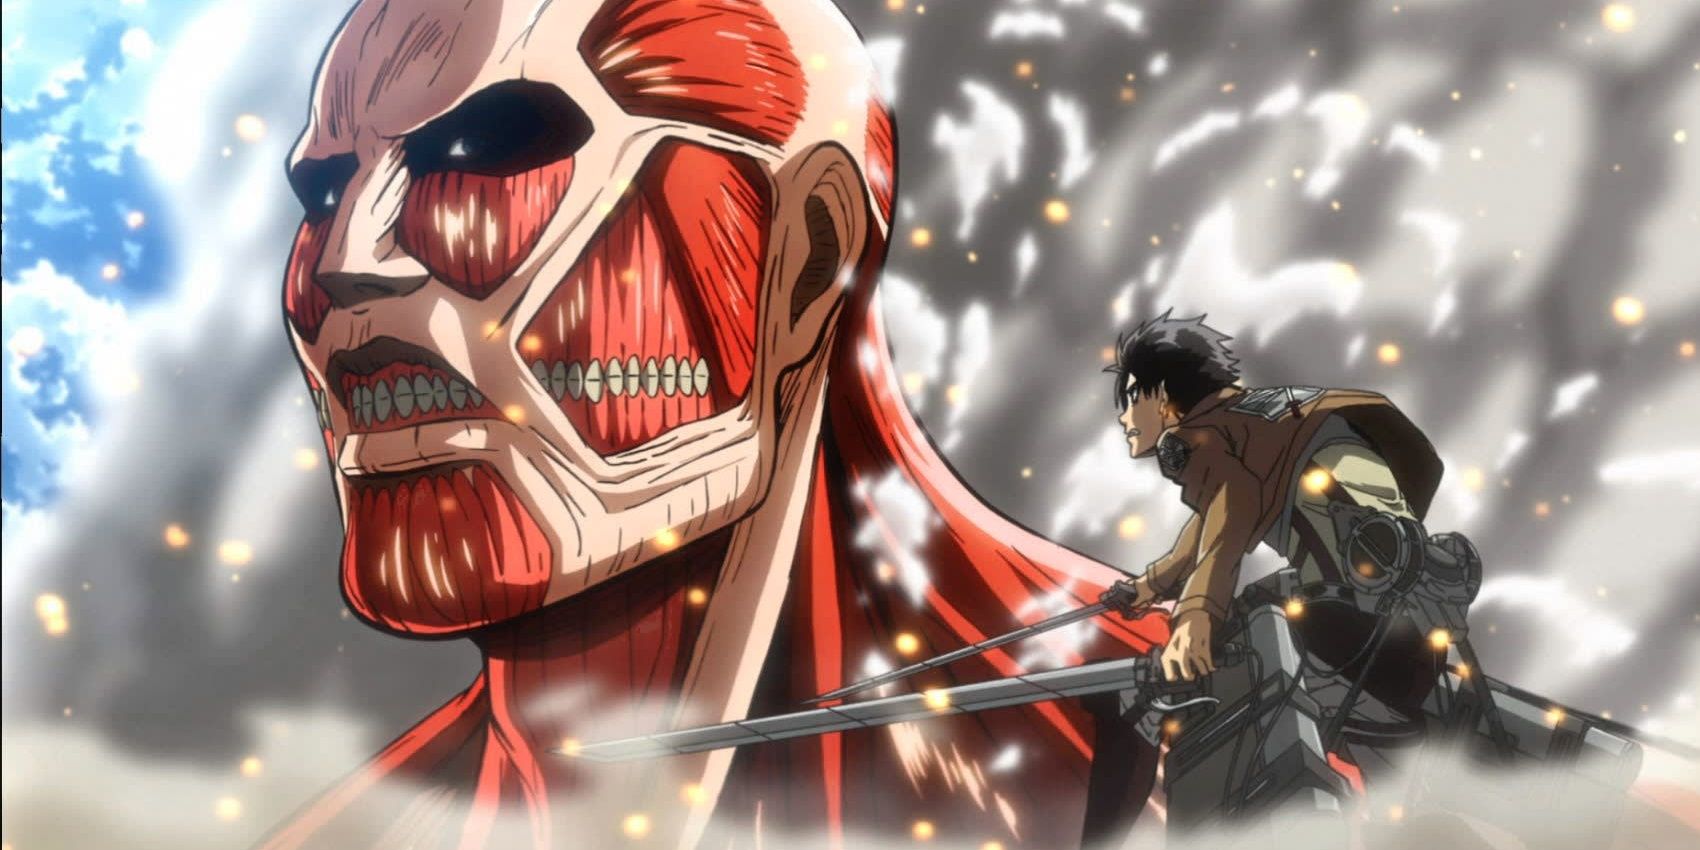 Attack on Titan' Manga Set to End in April